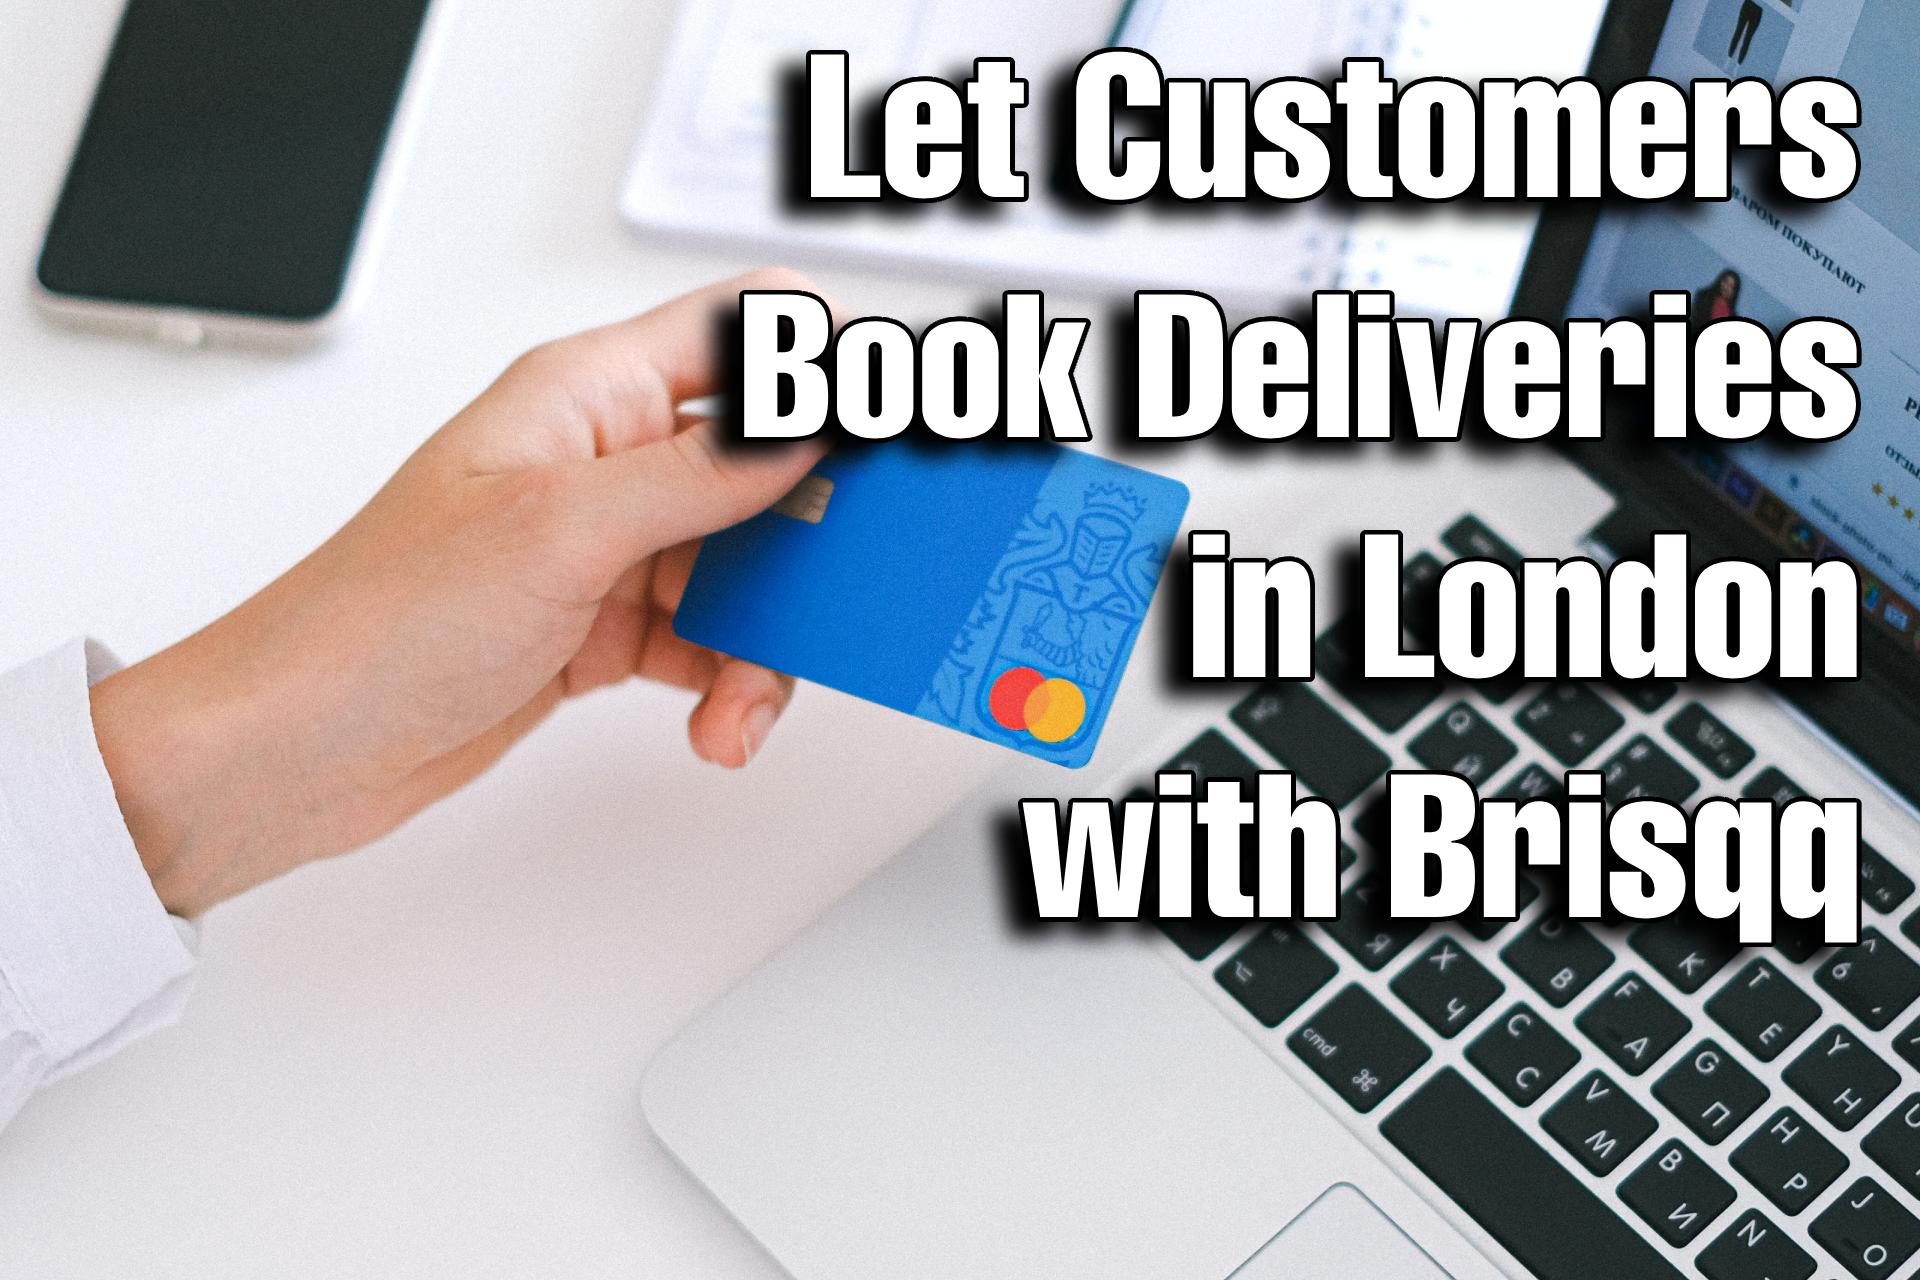 Let Customers Book Deliveries in London with Brisqq